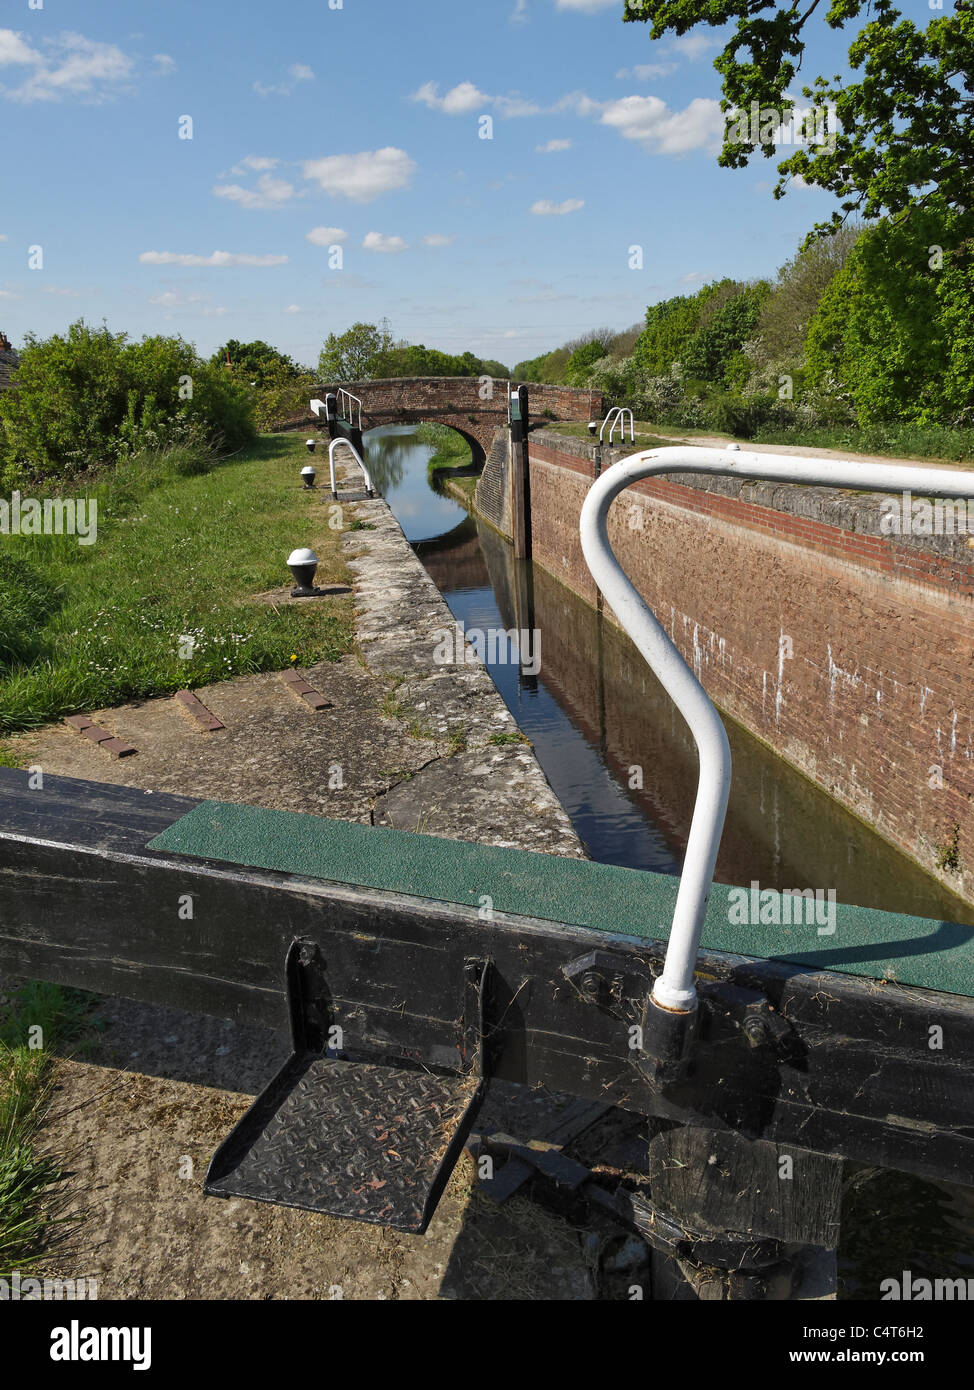 Woolsthorpe Middle Lock (No 17), The Grantham Canal, Woolsthorpe-by-Belvoir, Lincolnshire, England. Stock Photo